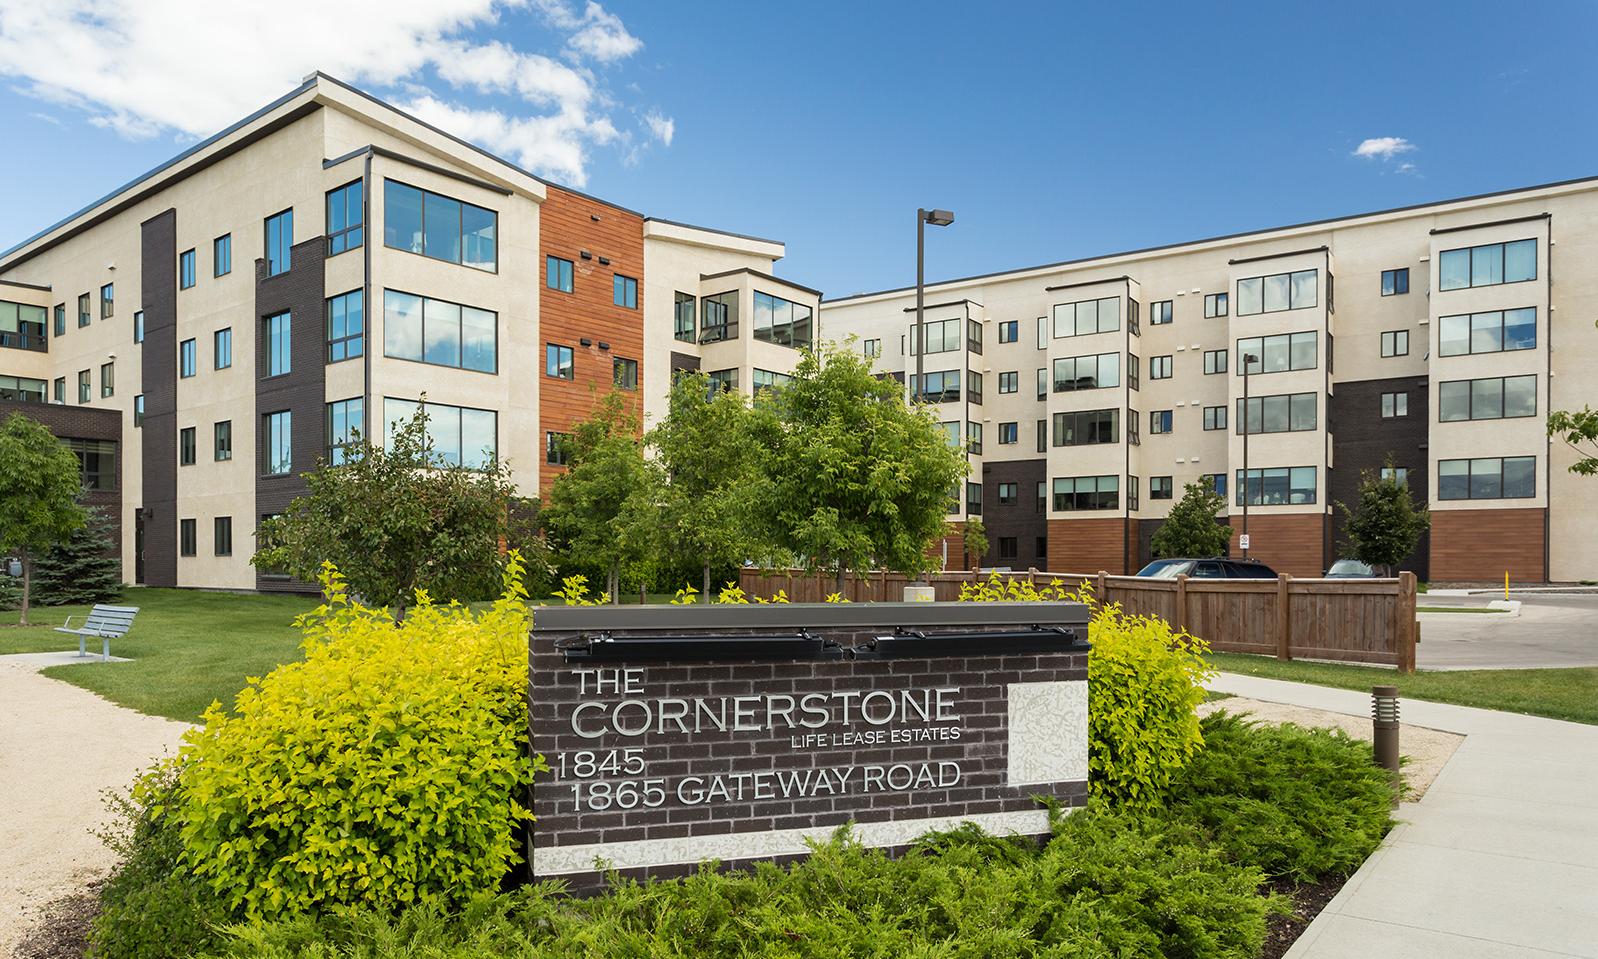 Cornerstone Life Lease Estates. Location plaque in foreground; the two Cornerstone buildings in the background. 